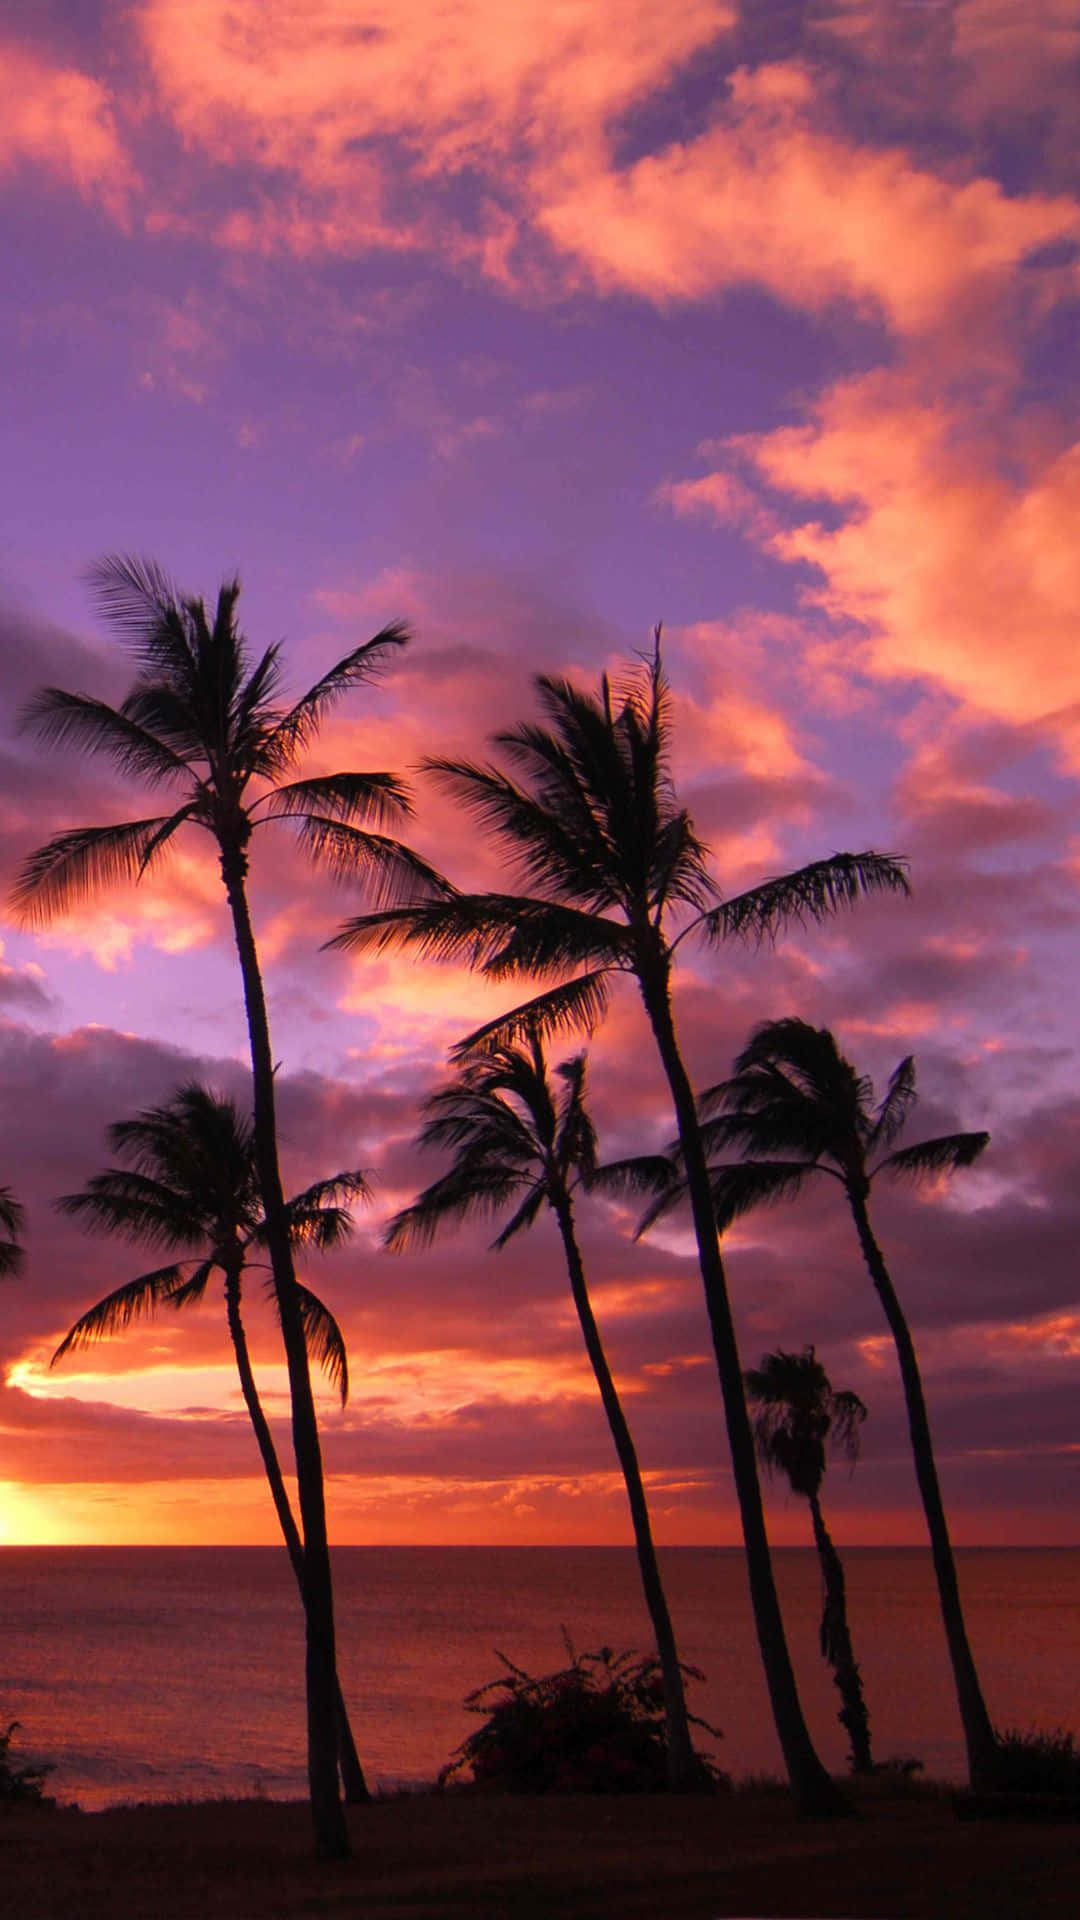 Enjoy the breathtaking beauty of Hawaii from the comfort of your iPhone! Wallpaper